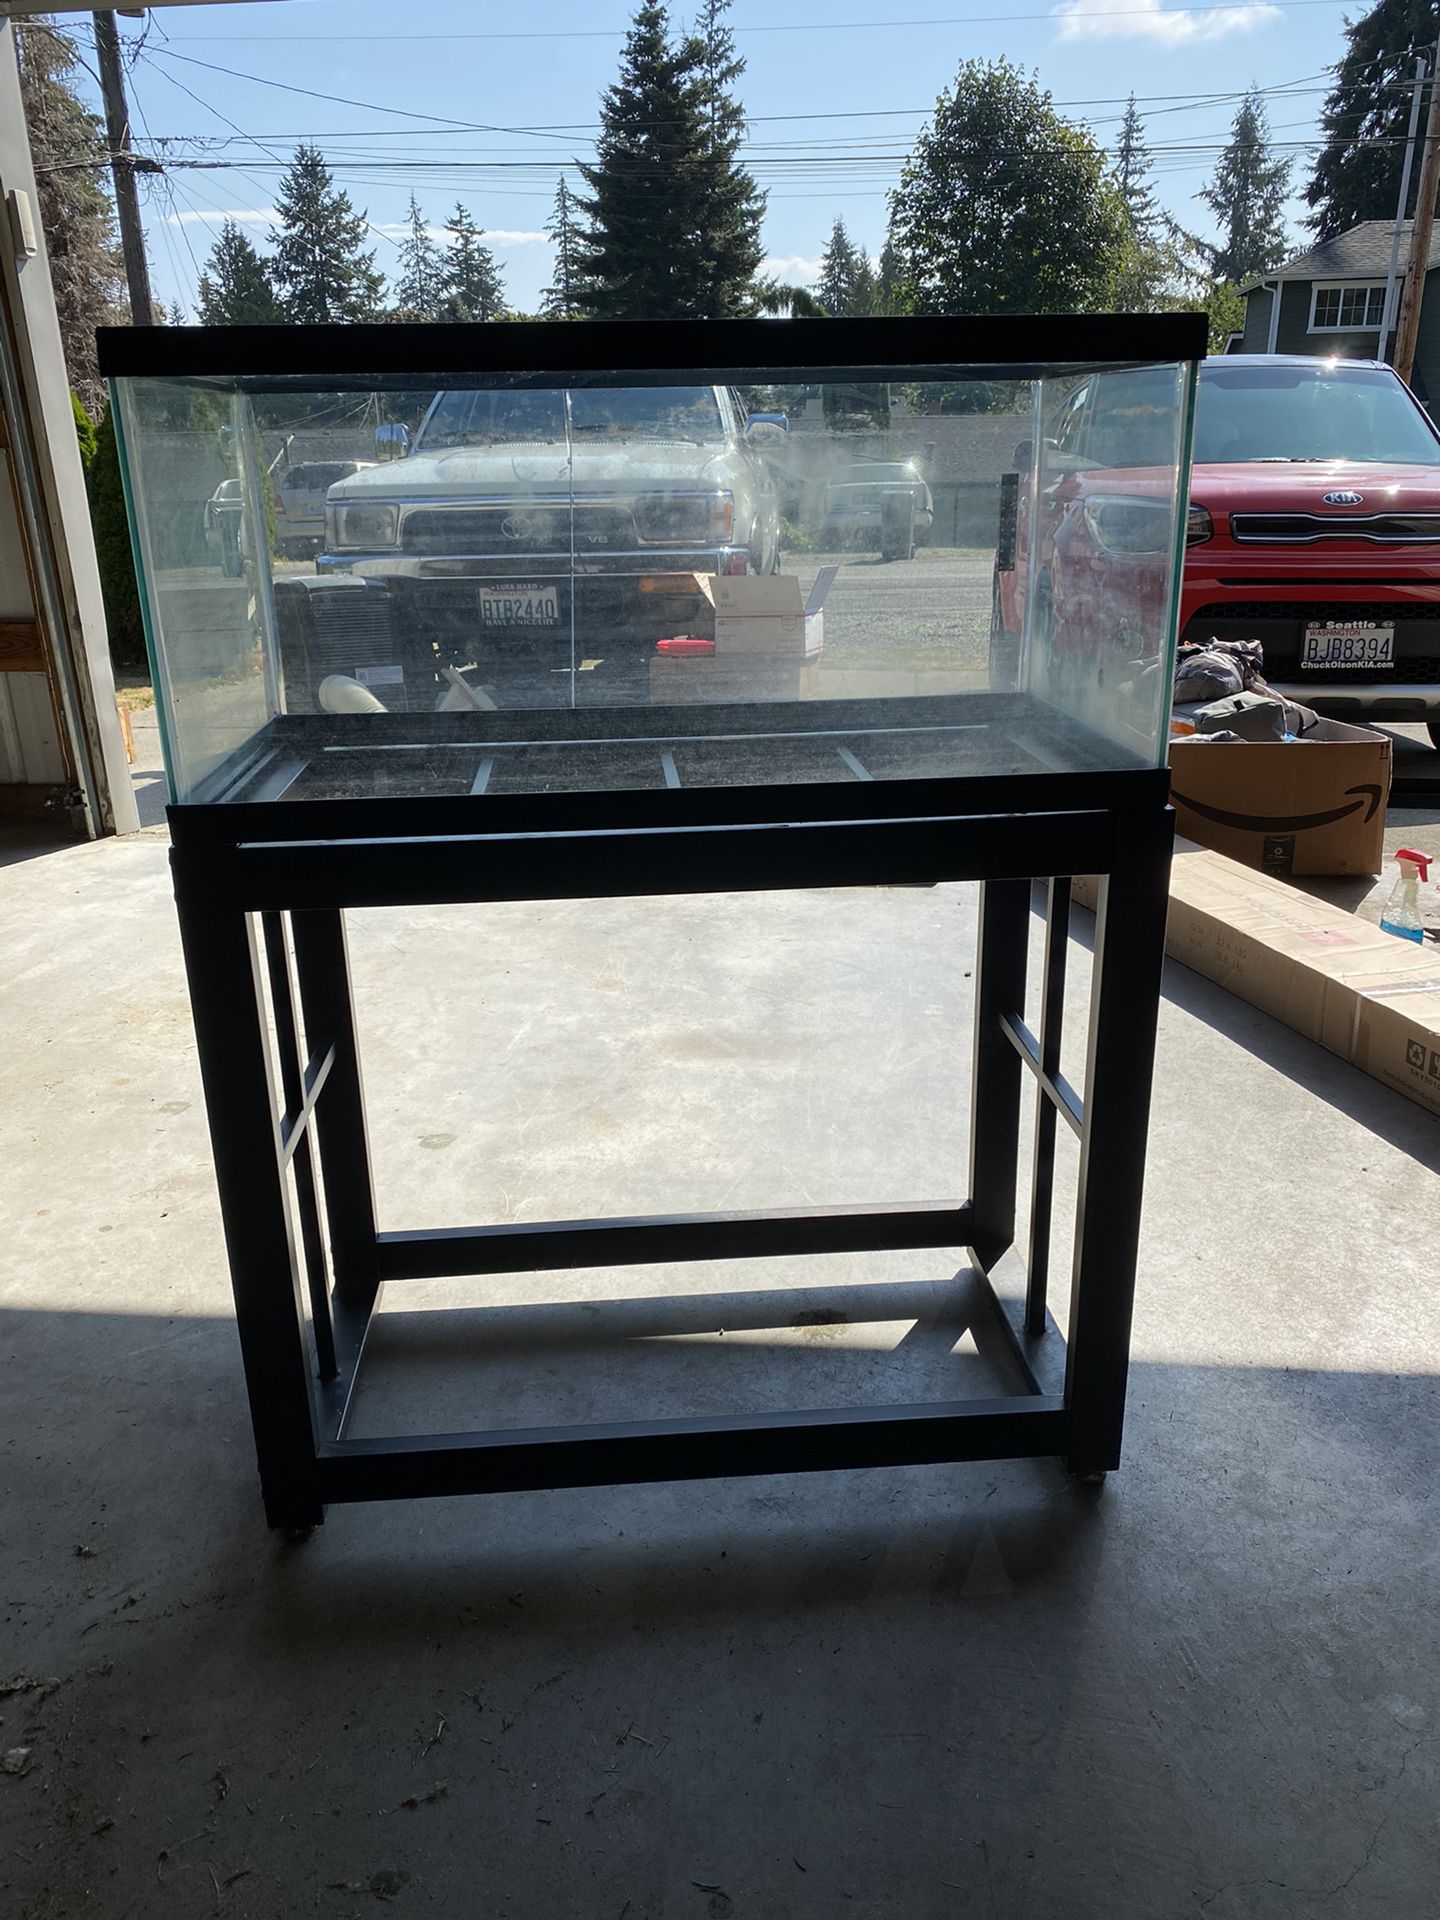 40 gallon Fish tank with stand